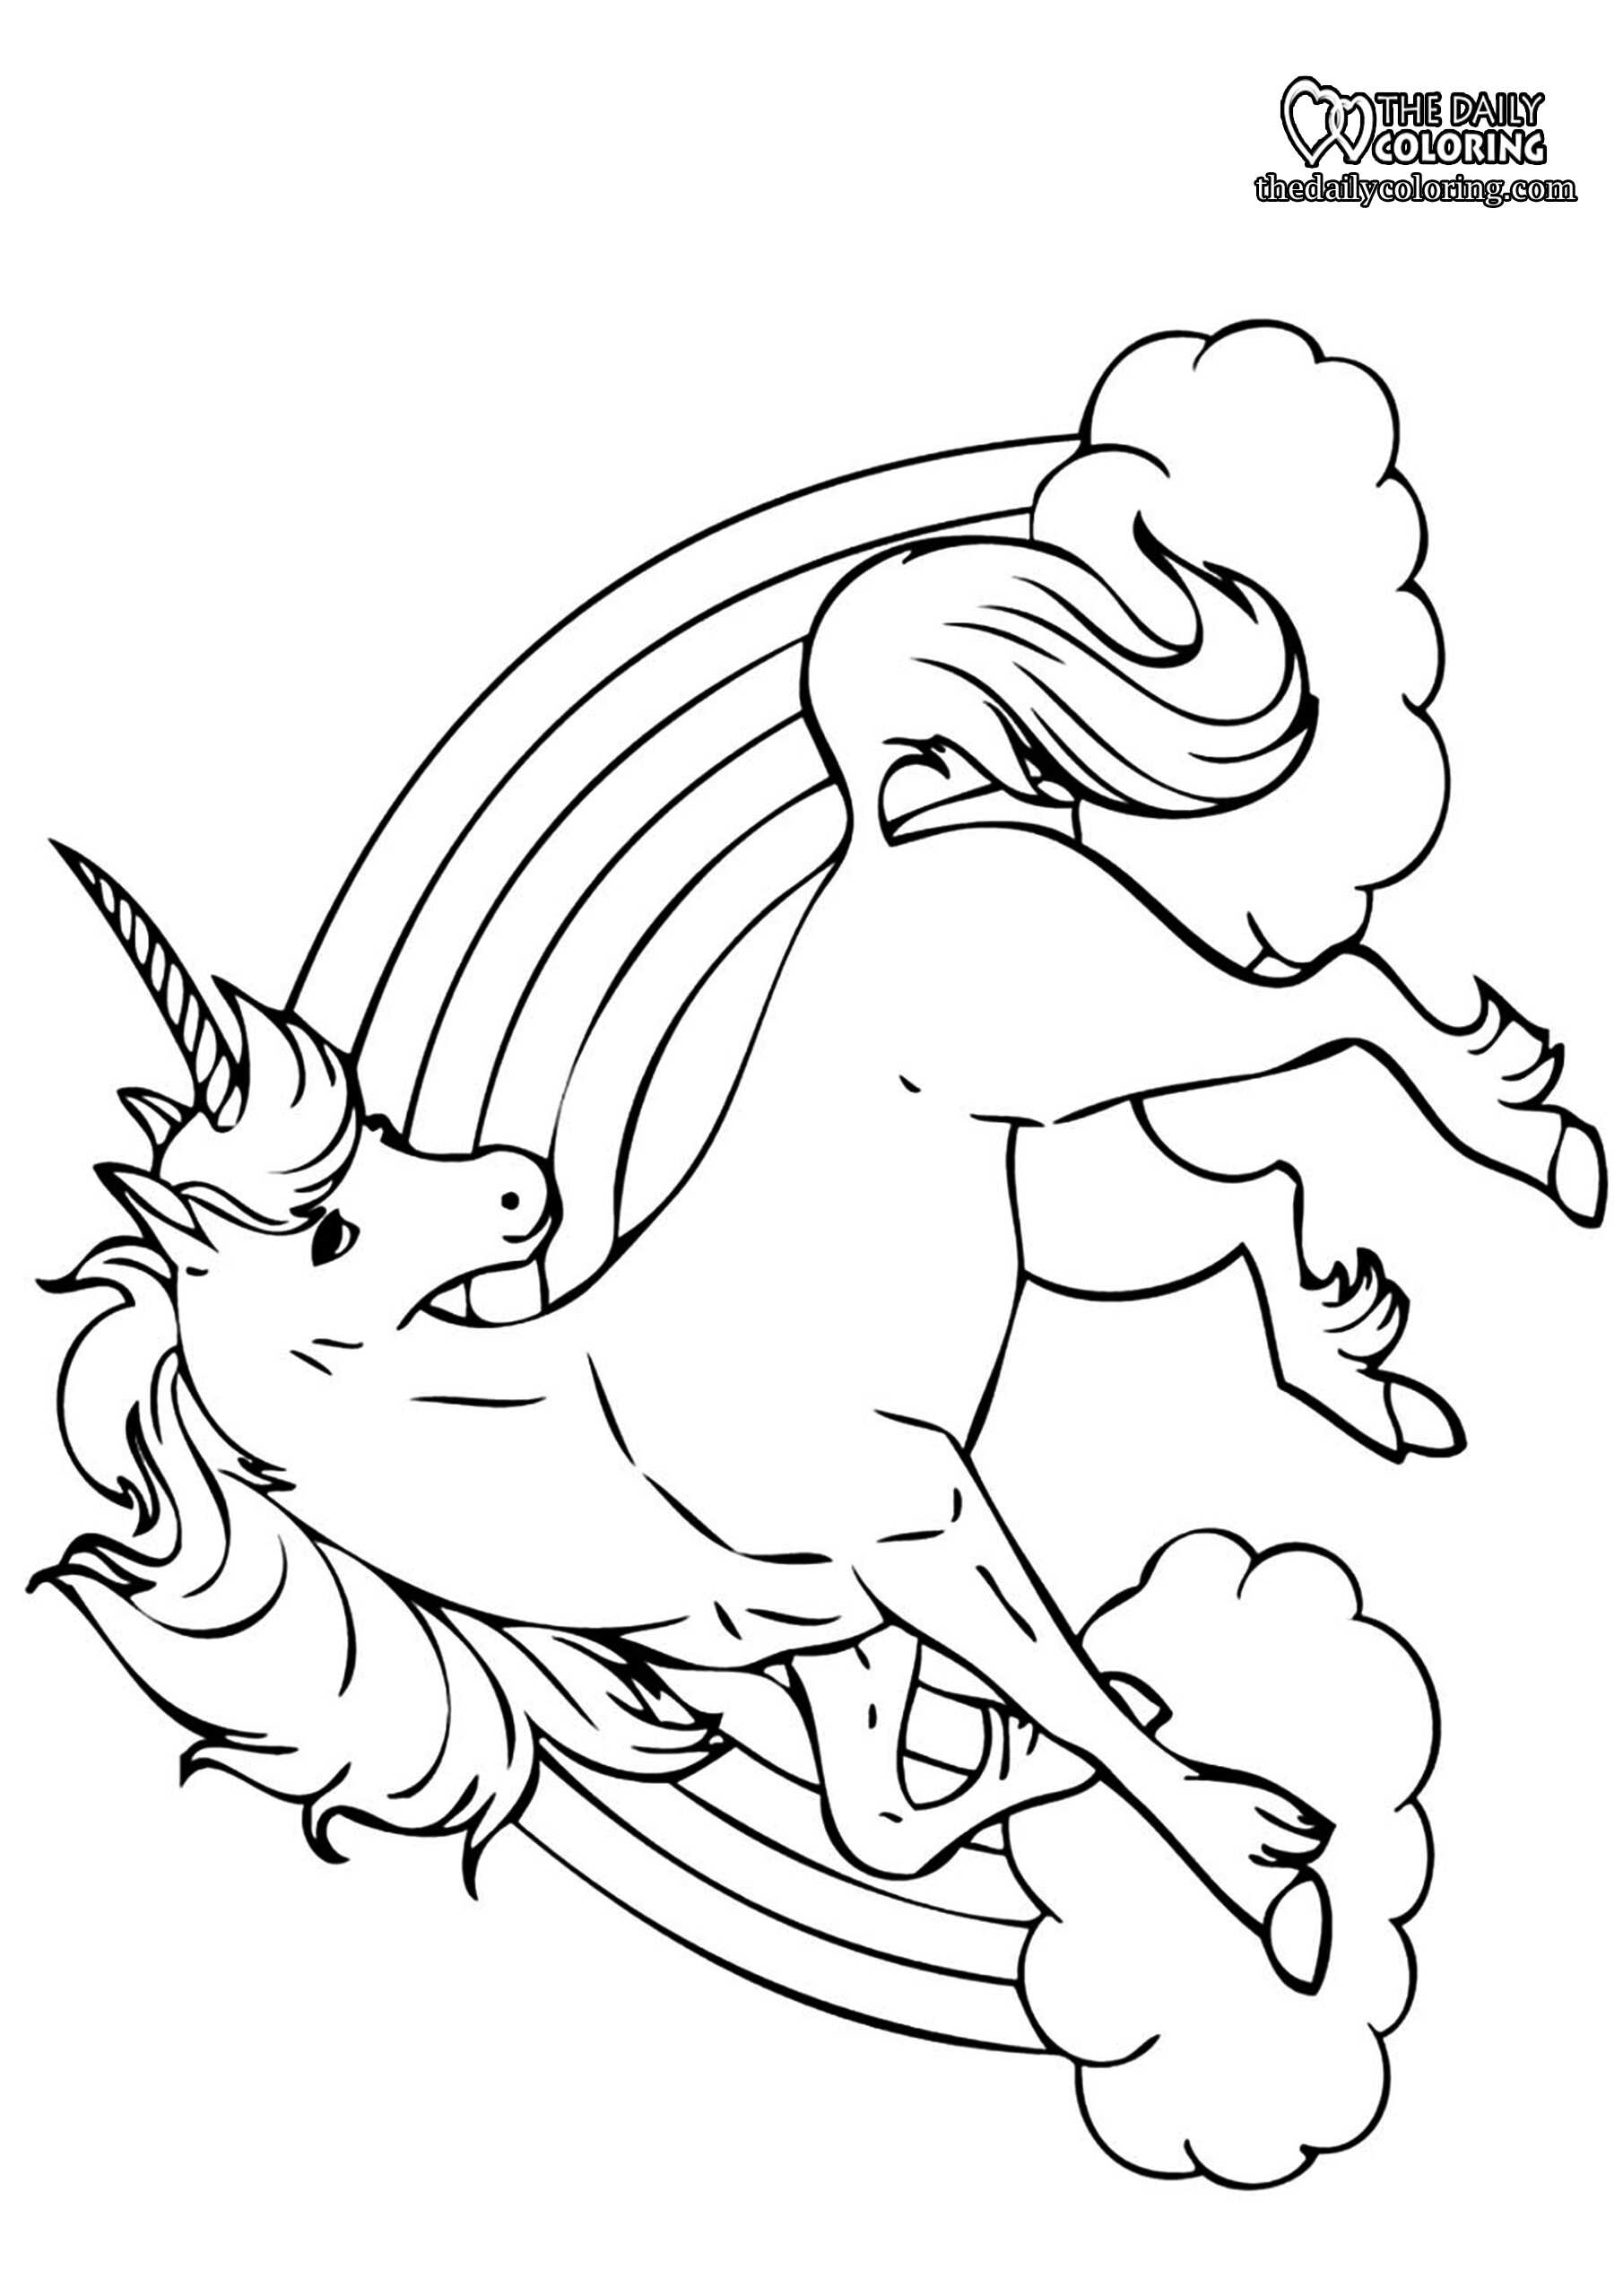 Unicorn Coloring Pages   The Daily Coloring